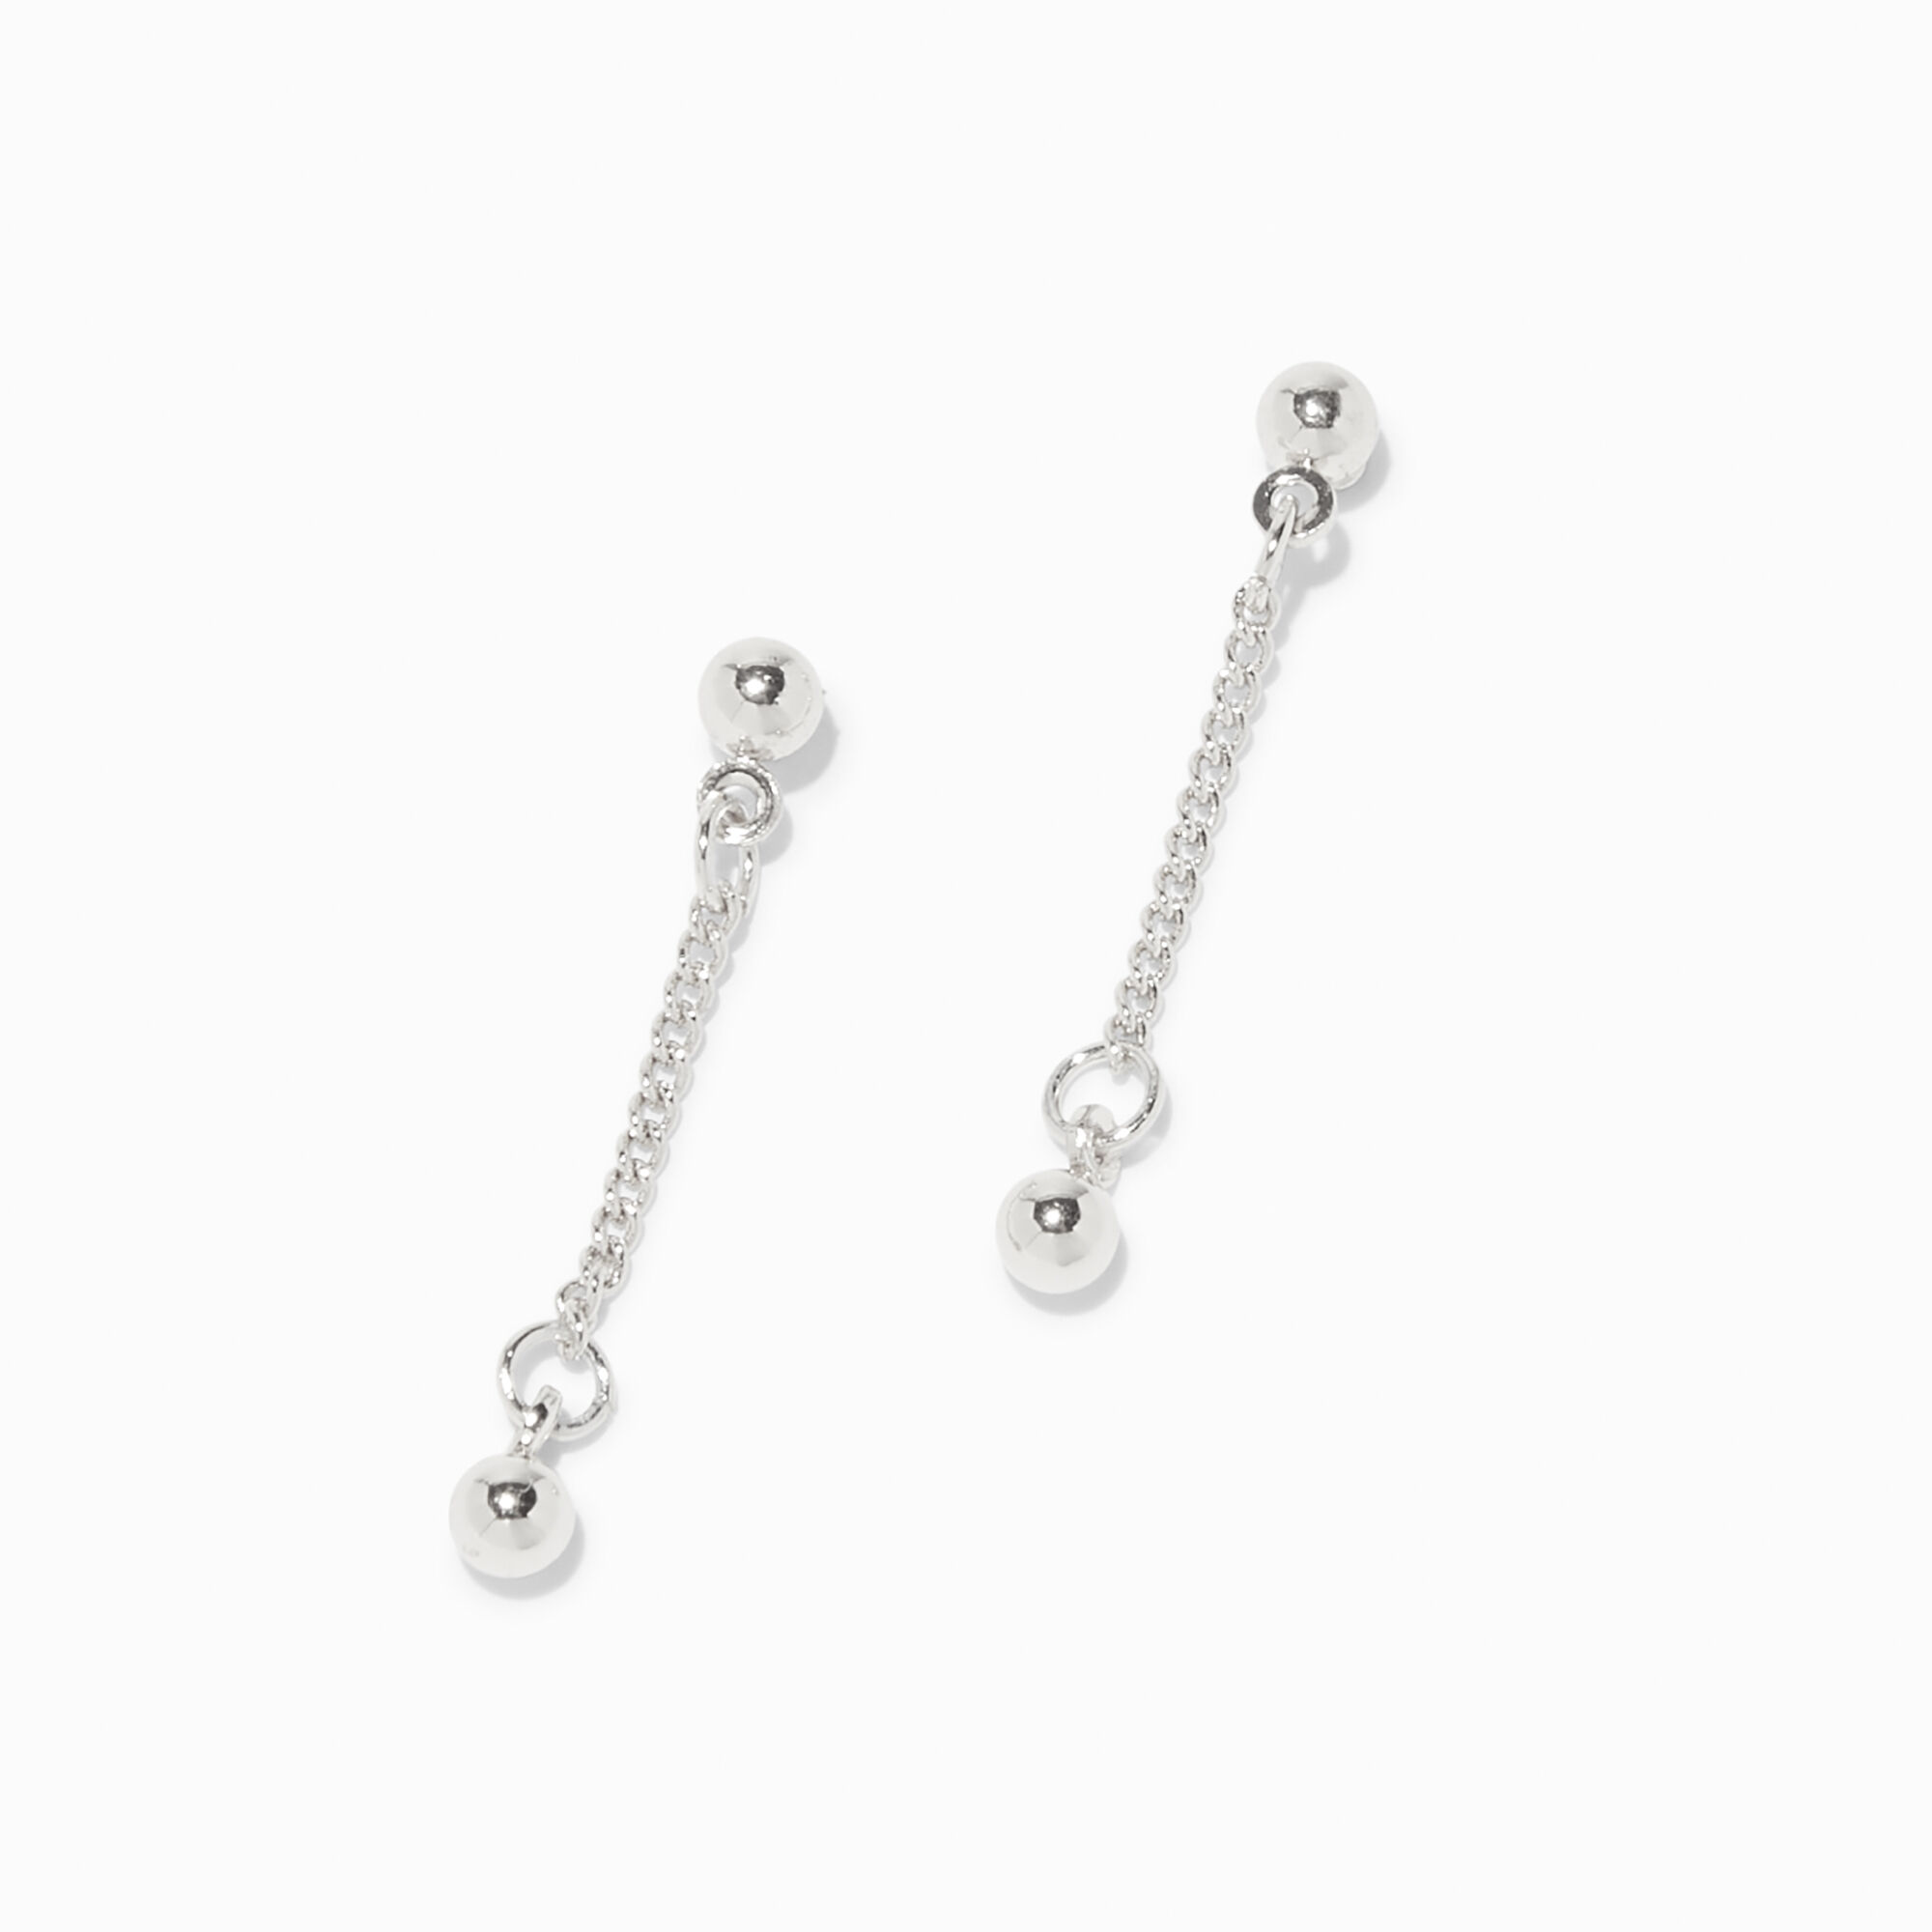 View Claires 1 Ball Drop Earrings Silver information